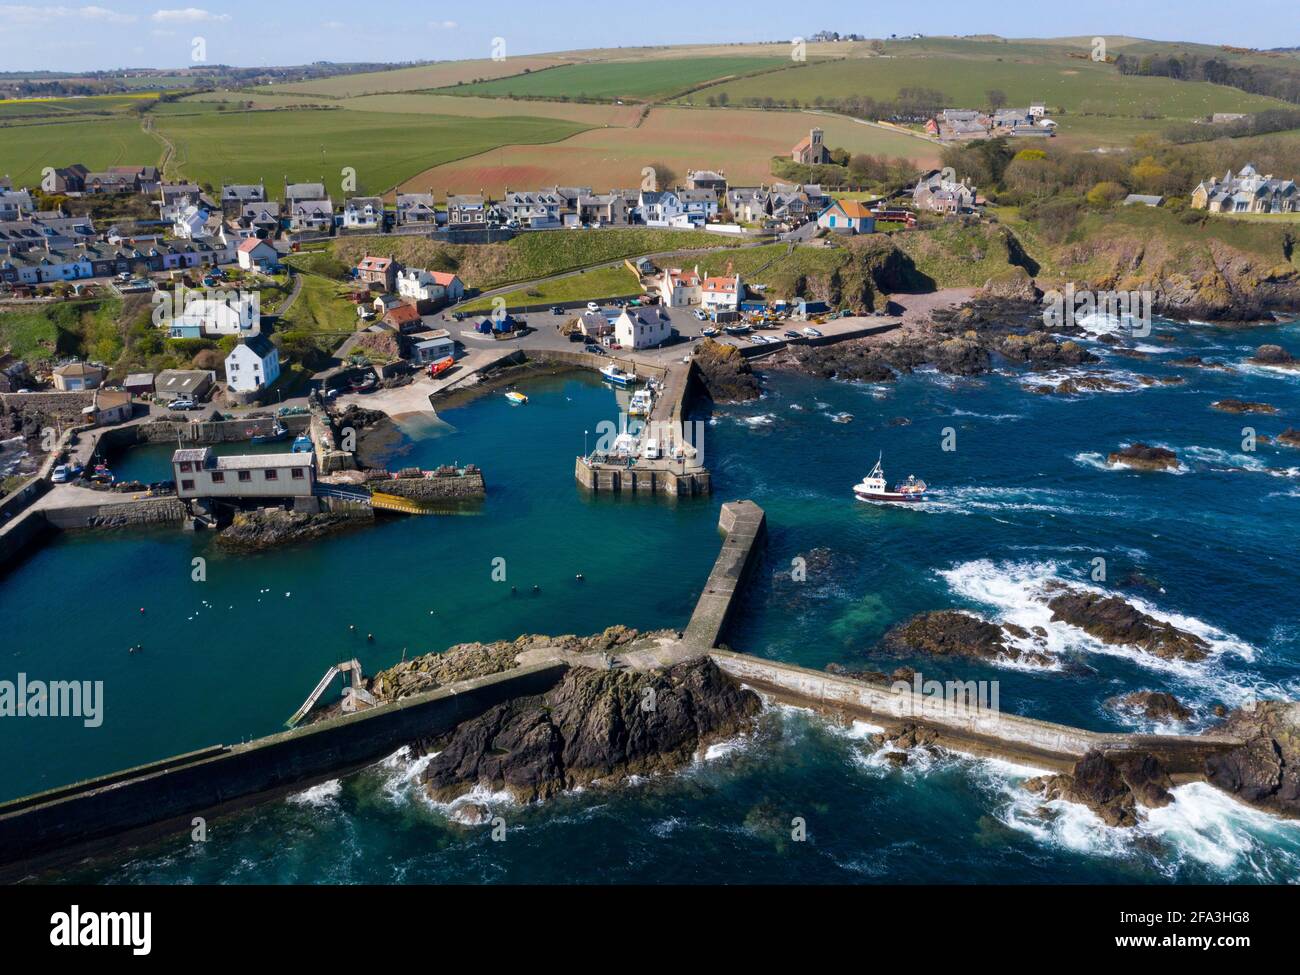 Aerial view shows a fishing vessel returning to St Abbs harbour on the Berwickshire coast, Scotland, UK. Stock Photo